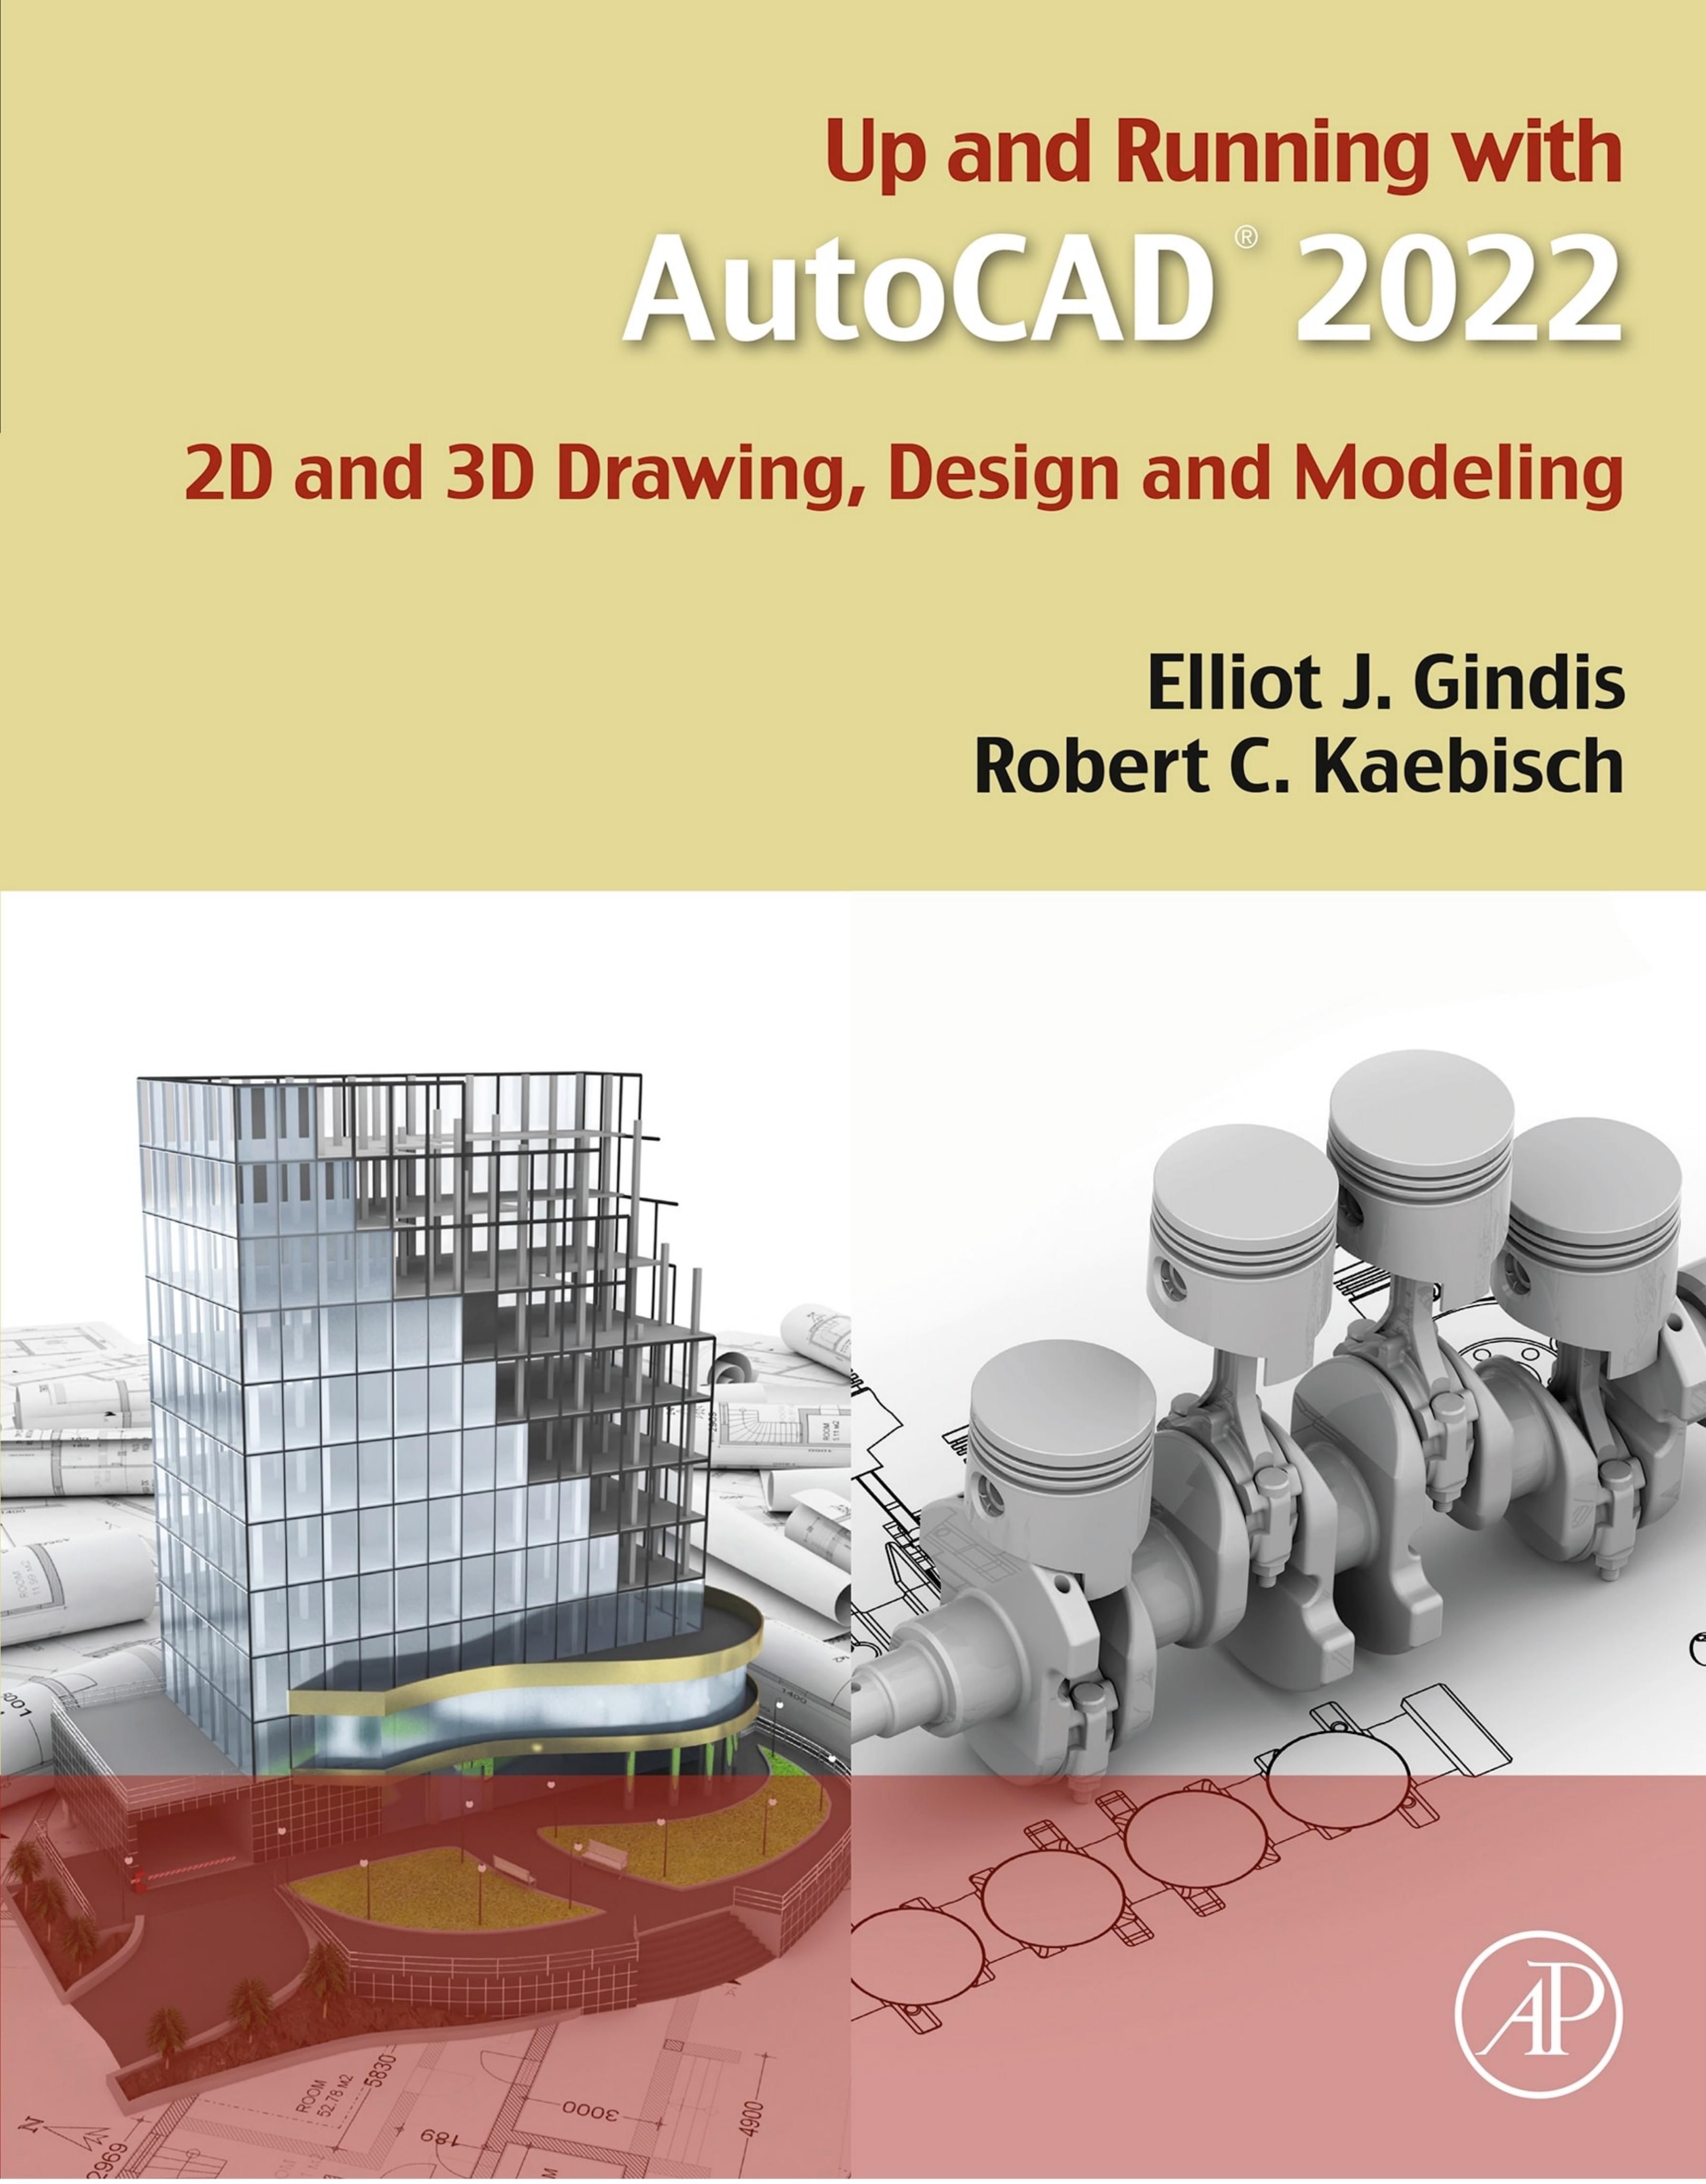 Up and Running with AutoCAD 2022: 2D and 3D Drawing, Design and Modeling by Elliot J. Gindis Robert C. Kaebisch